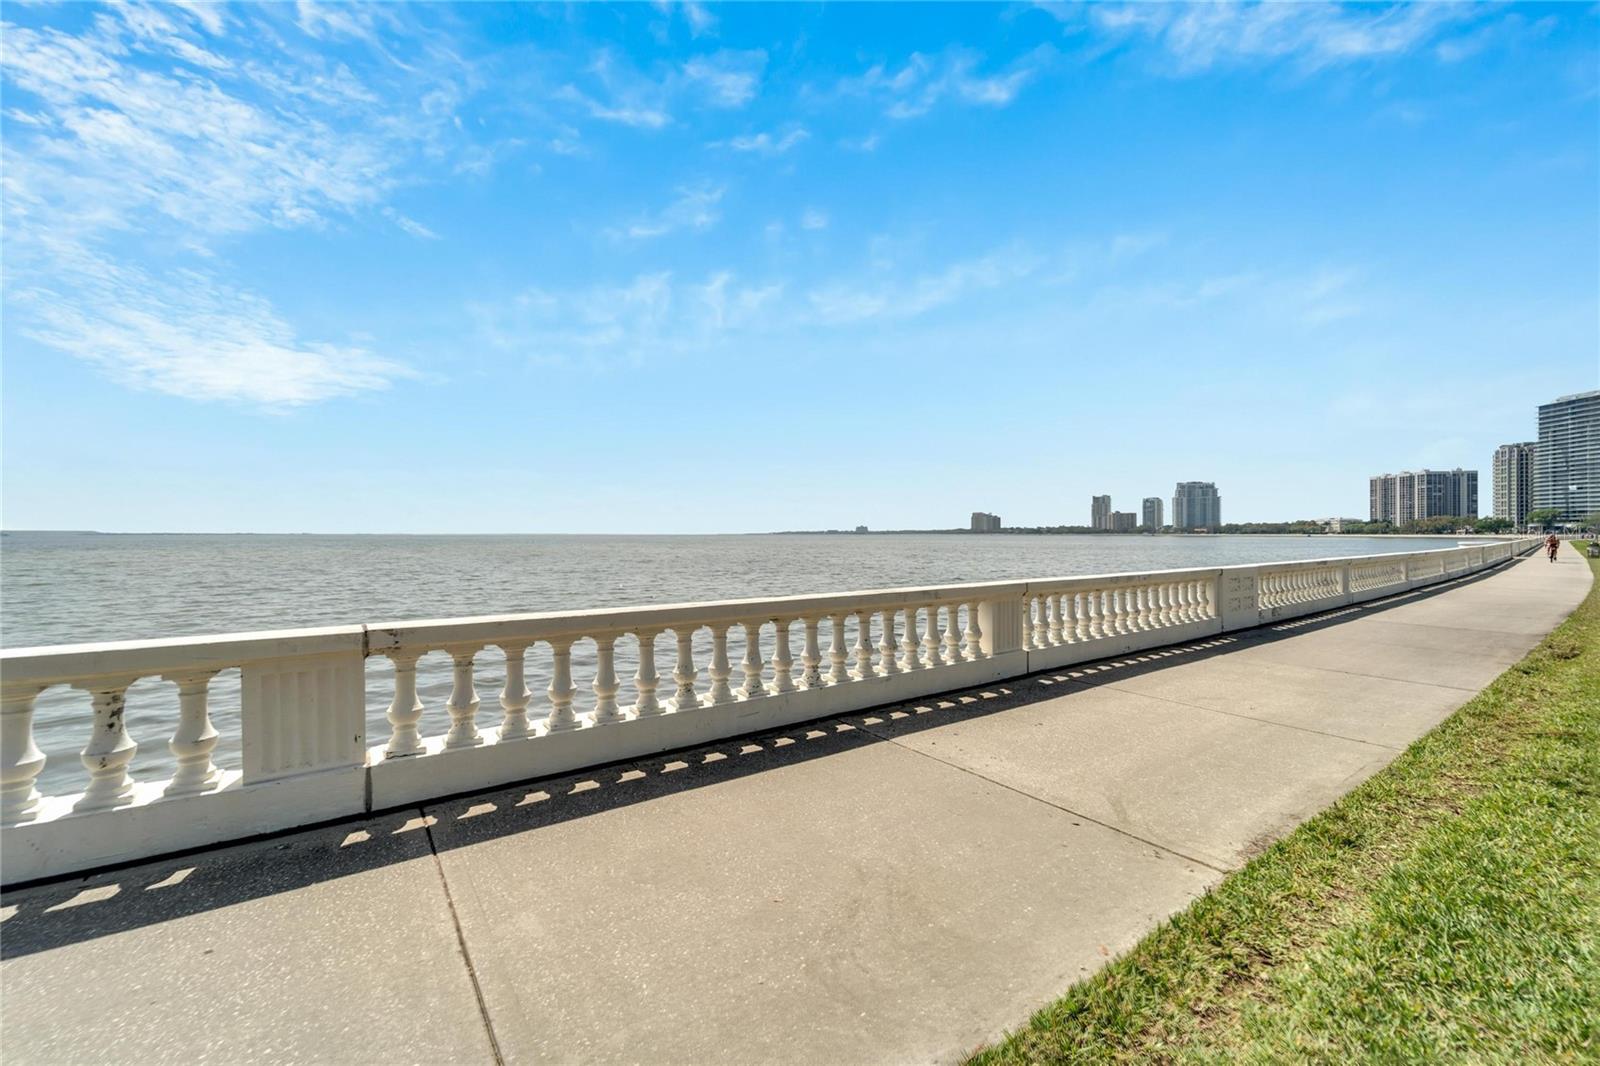 BAYSHORE BLVD WORLDS LONGEST CONTINOUS SIDEWALK FOR 4.3 MILES ALONG THE WATER